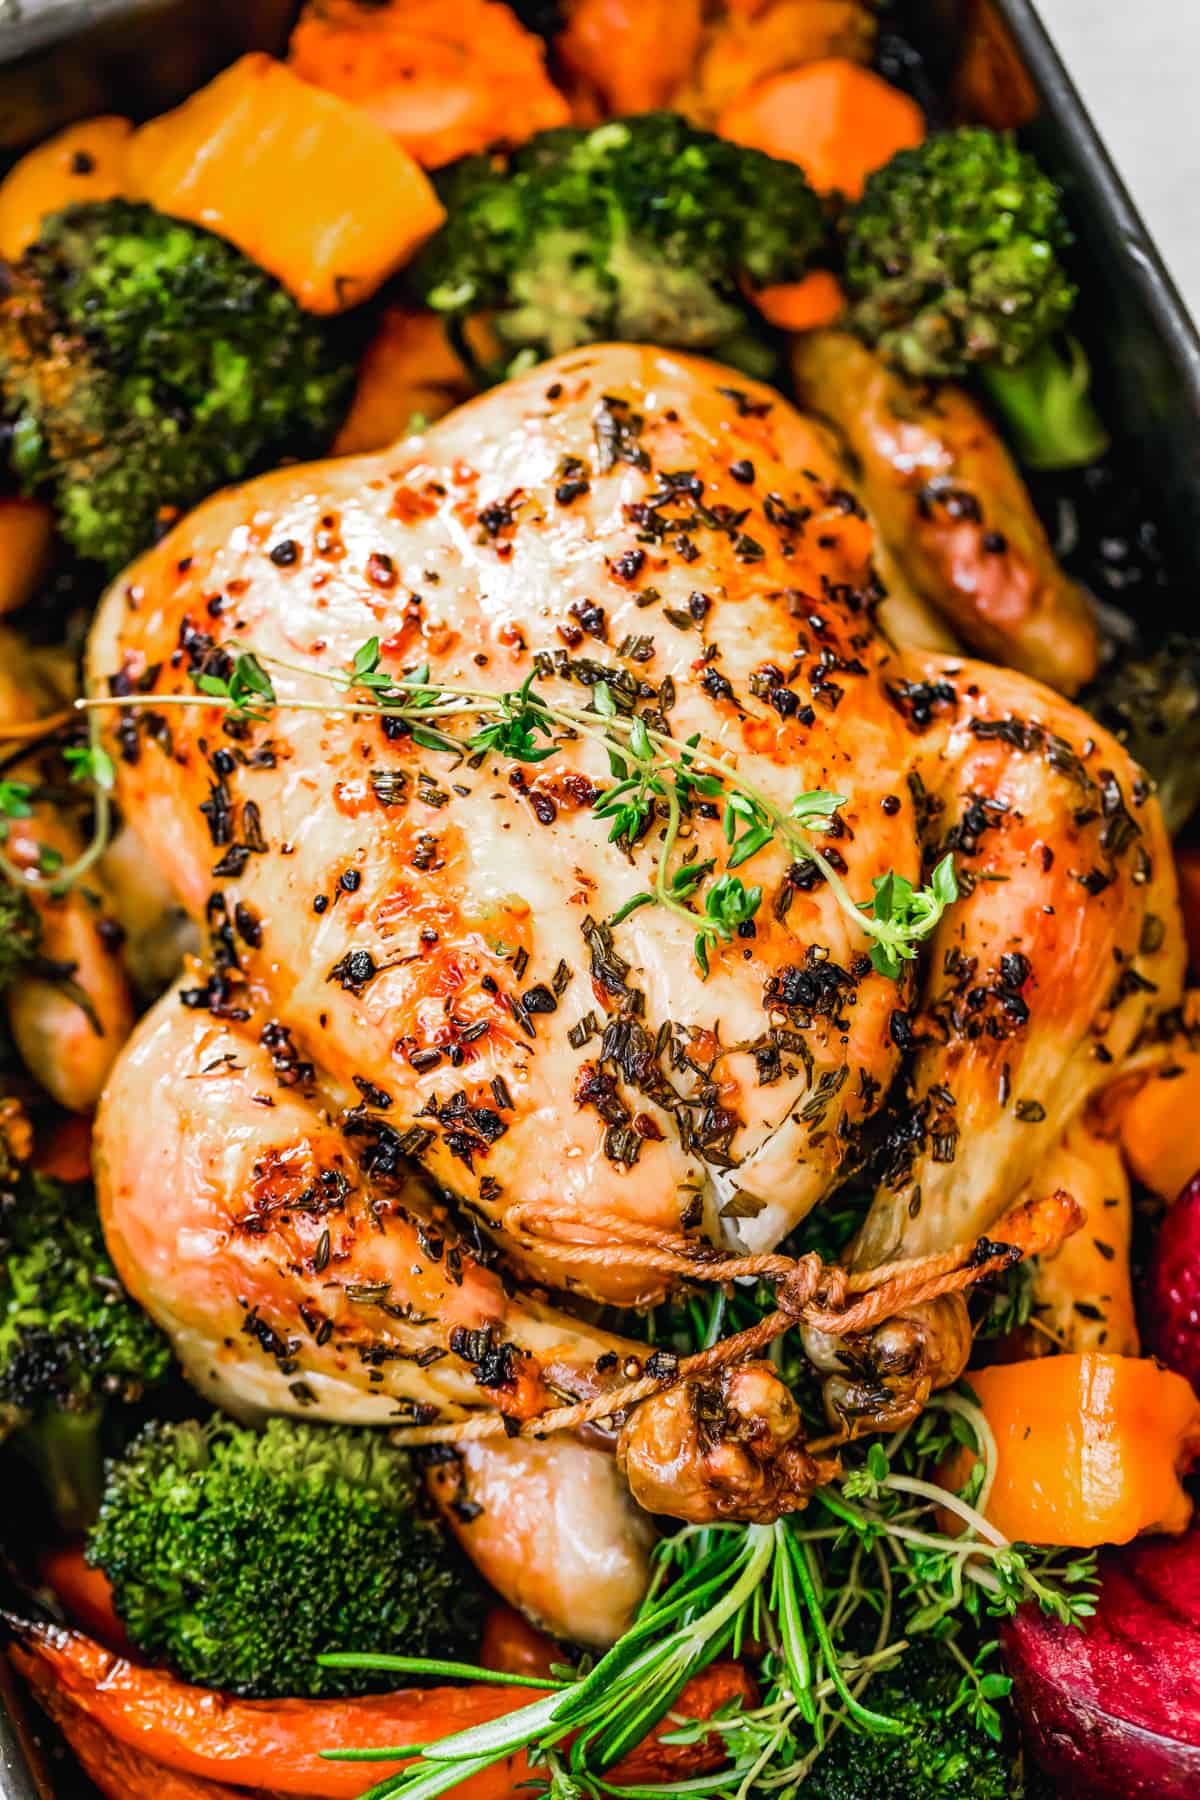 Delicious Umbrian Roast Chicken With Seasonal Vegetables